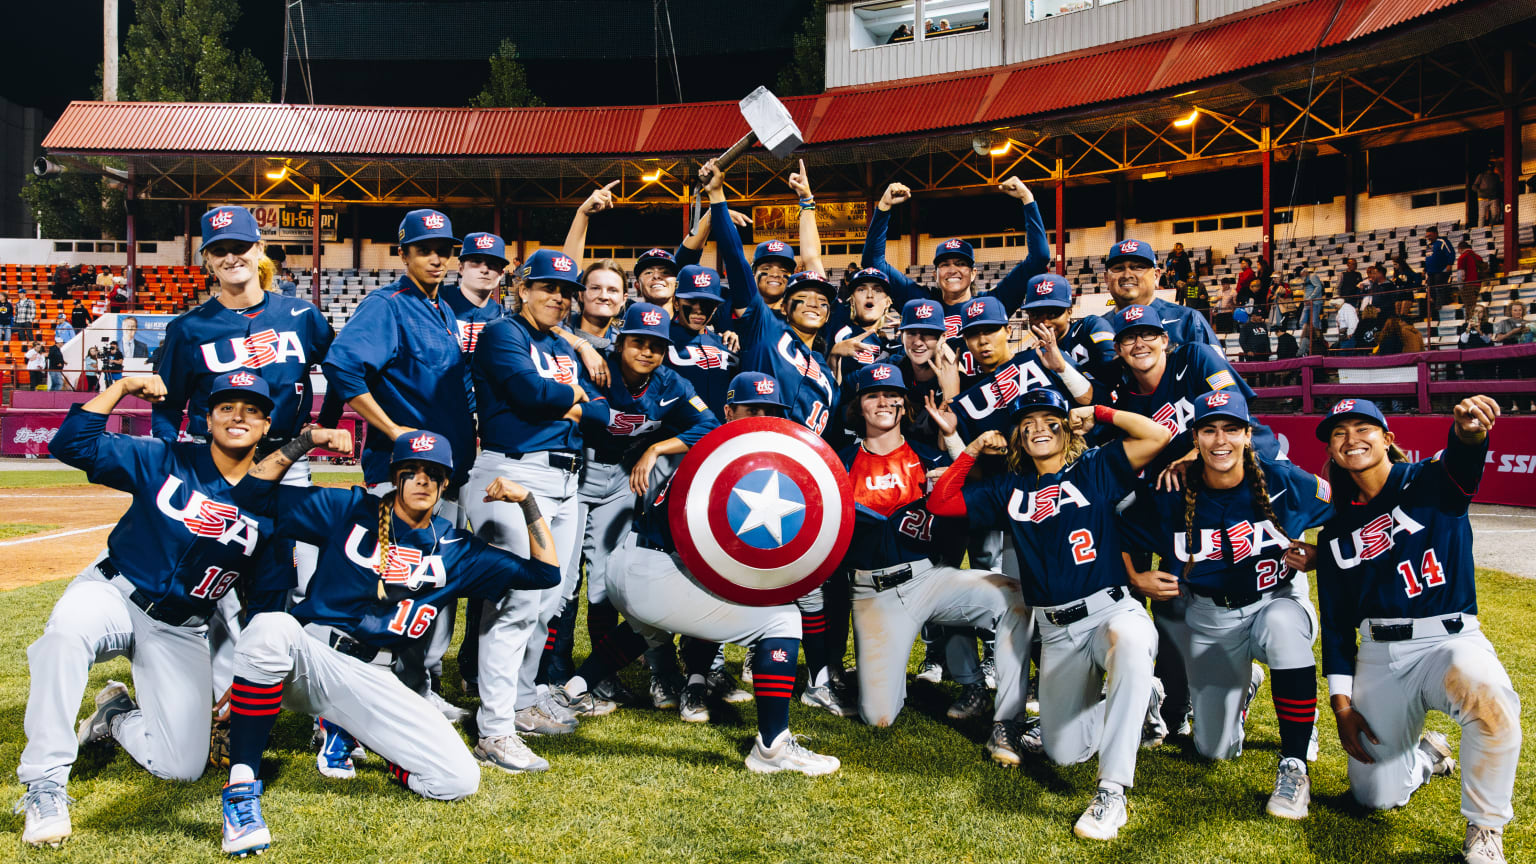 The U.S. women's baseball team poses in a group shot